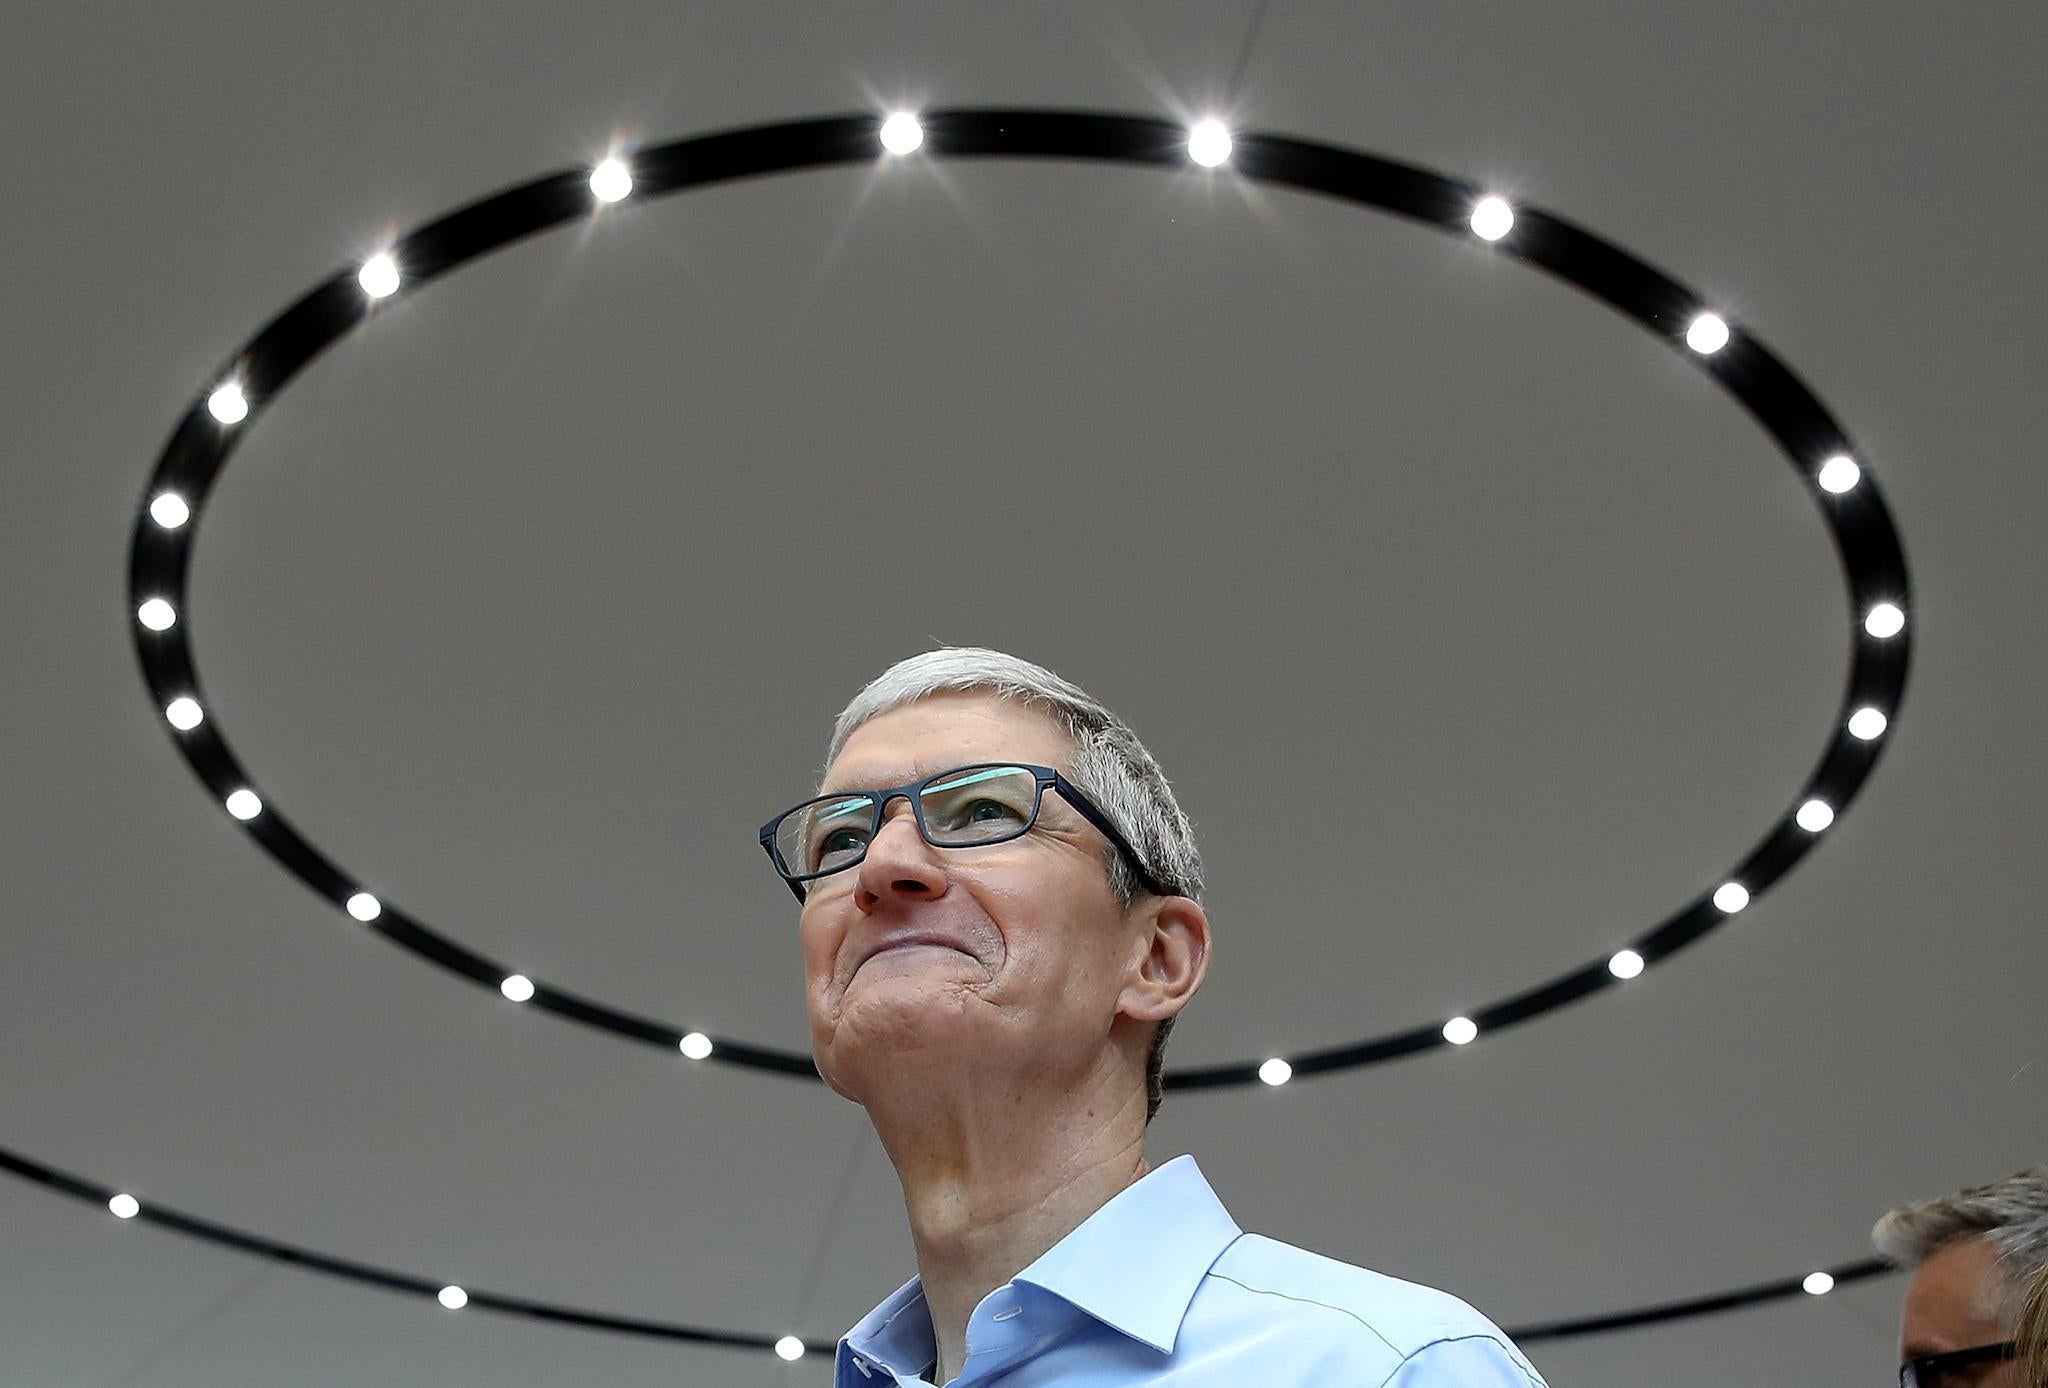 Apple CEO Tim Cook looks on during an Apple special event at the Steve Jobs Theatre on the Apple Park campus on September 12, 2017 in Cupertino, California